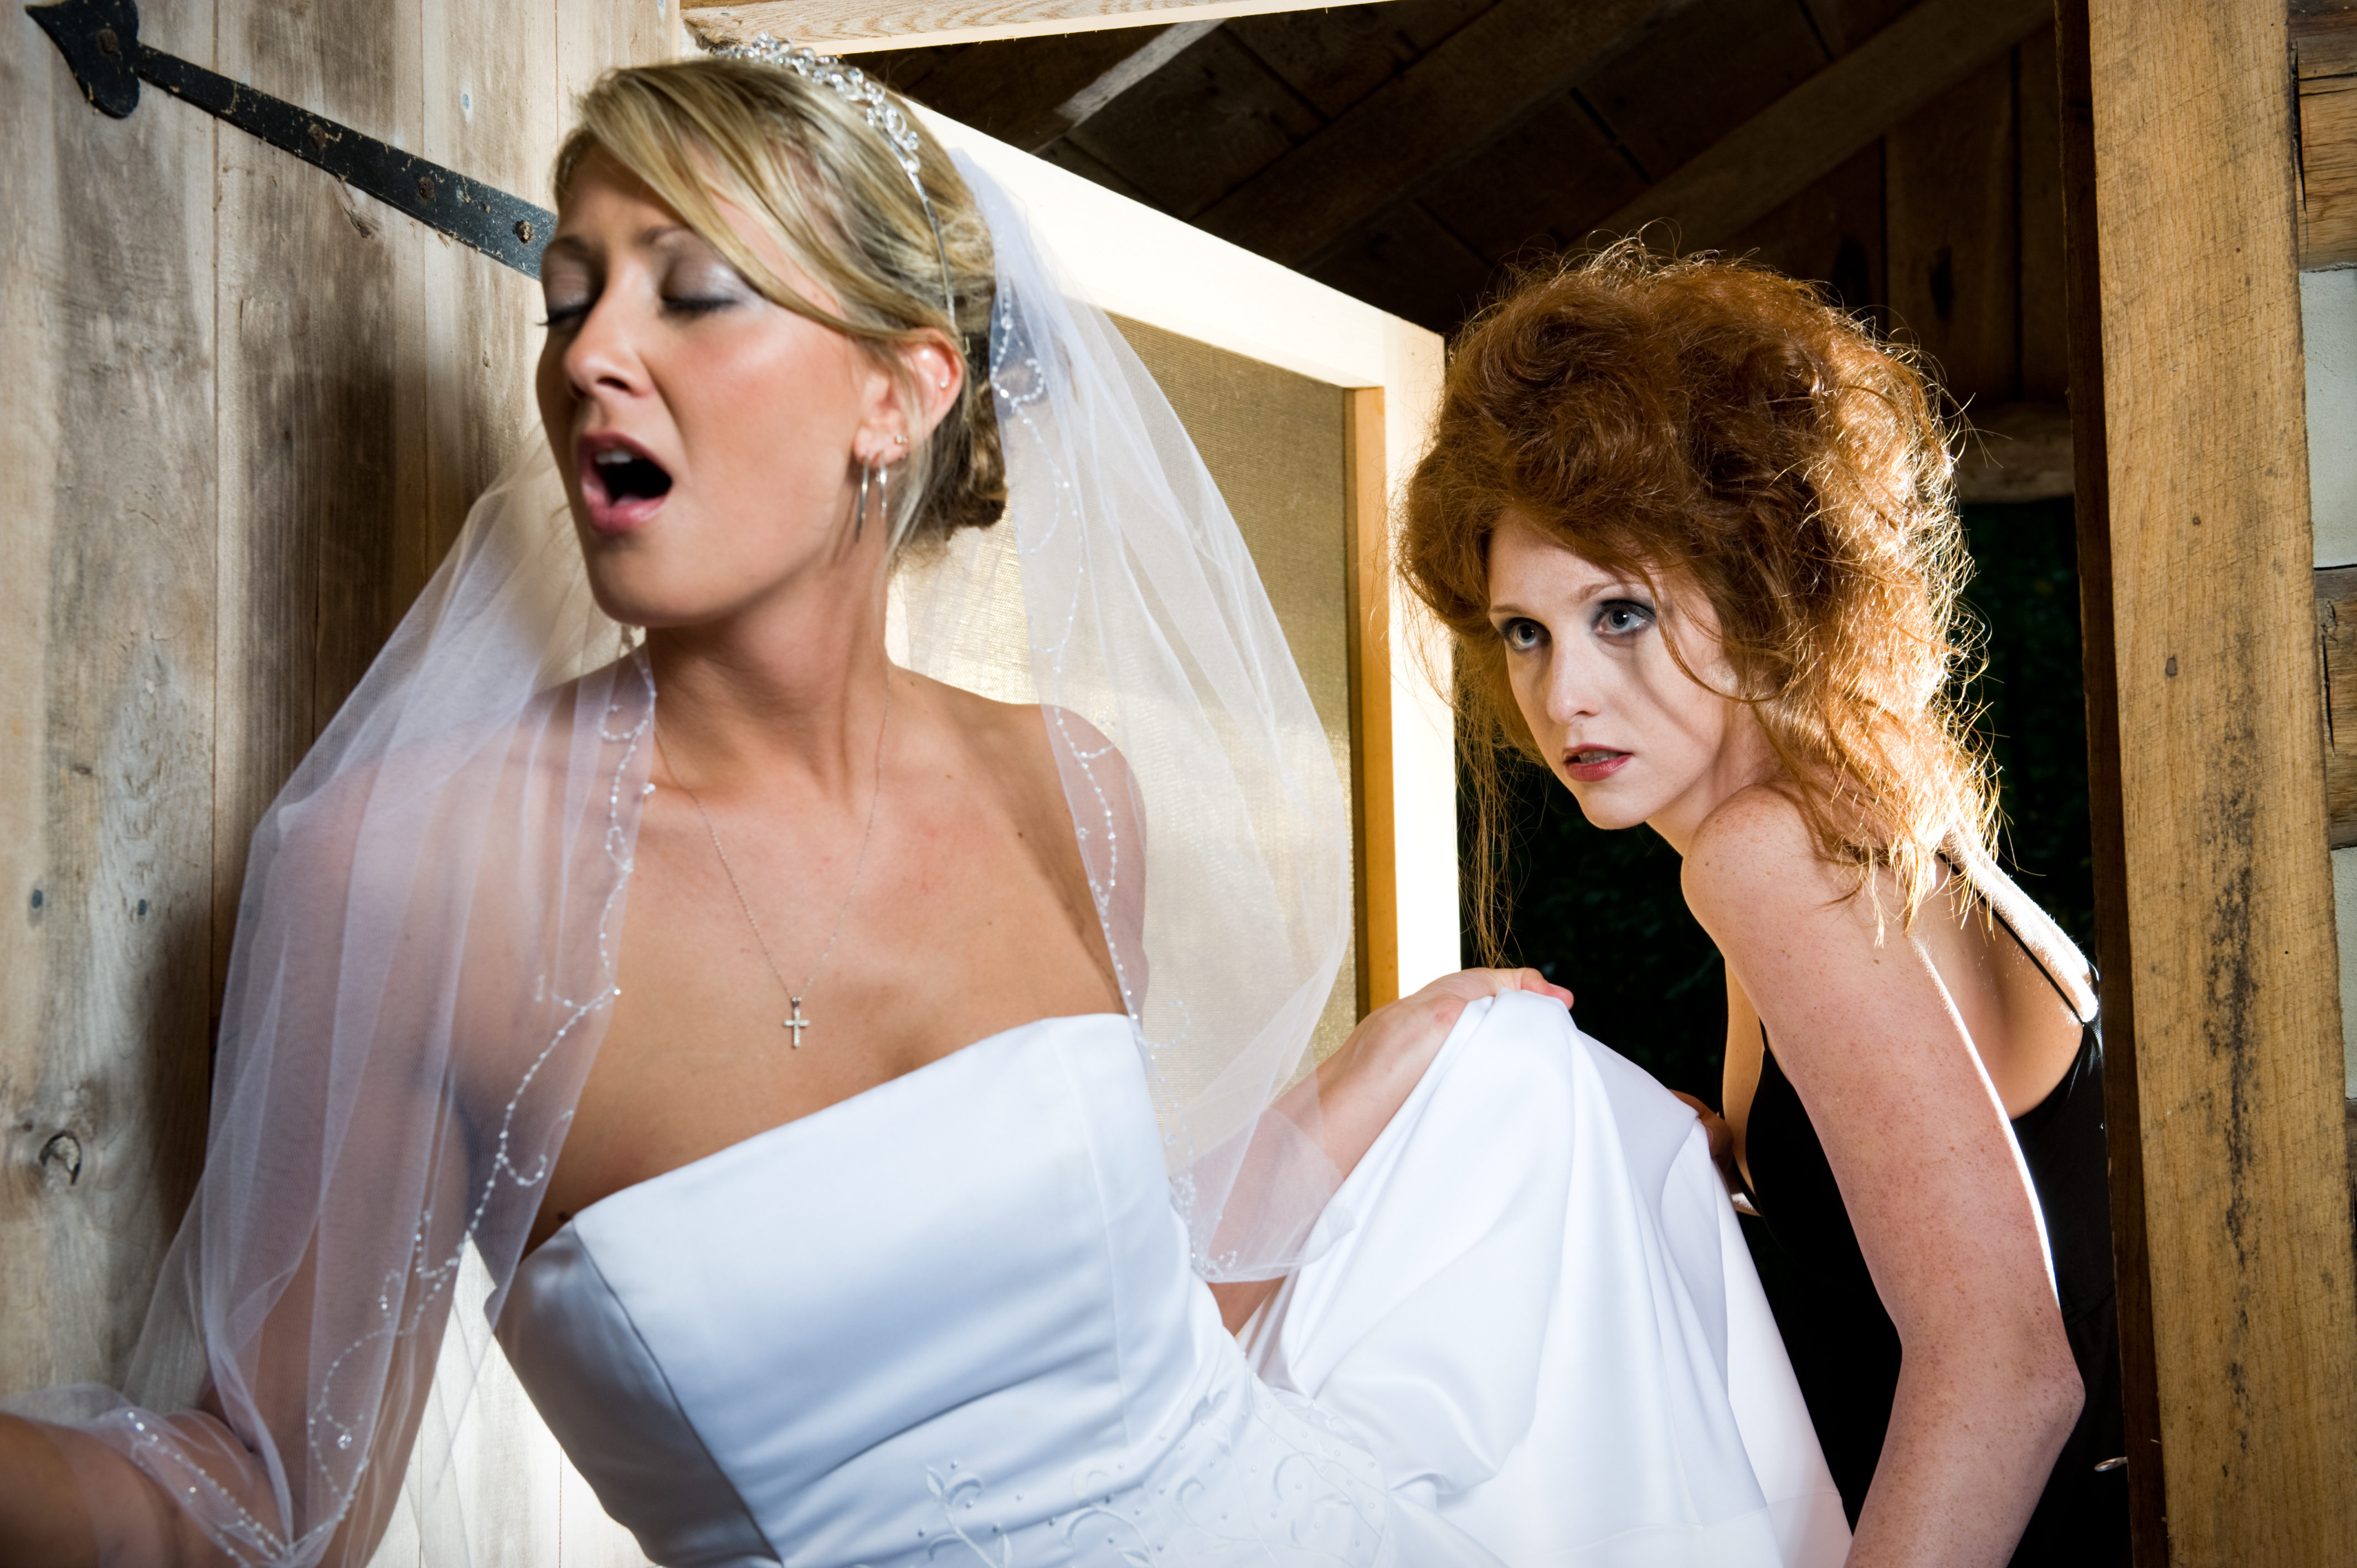 A woman staring at a stressed out bride | Source: Getty Images